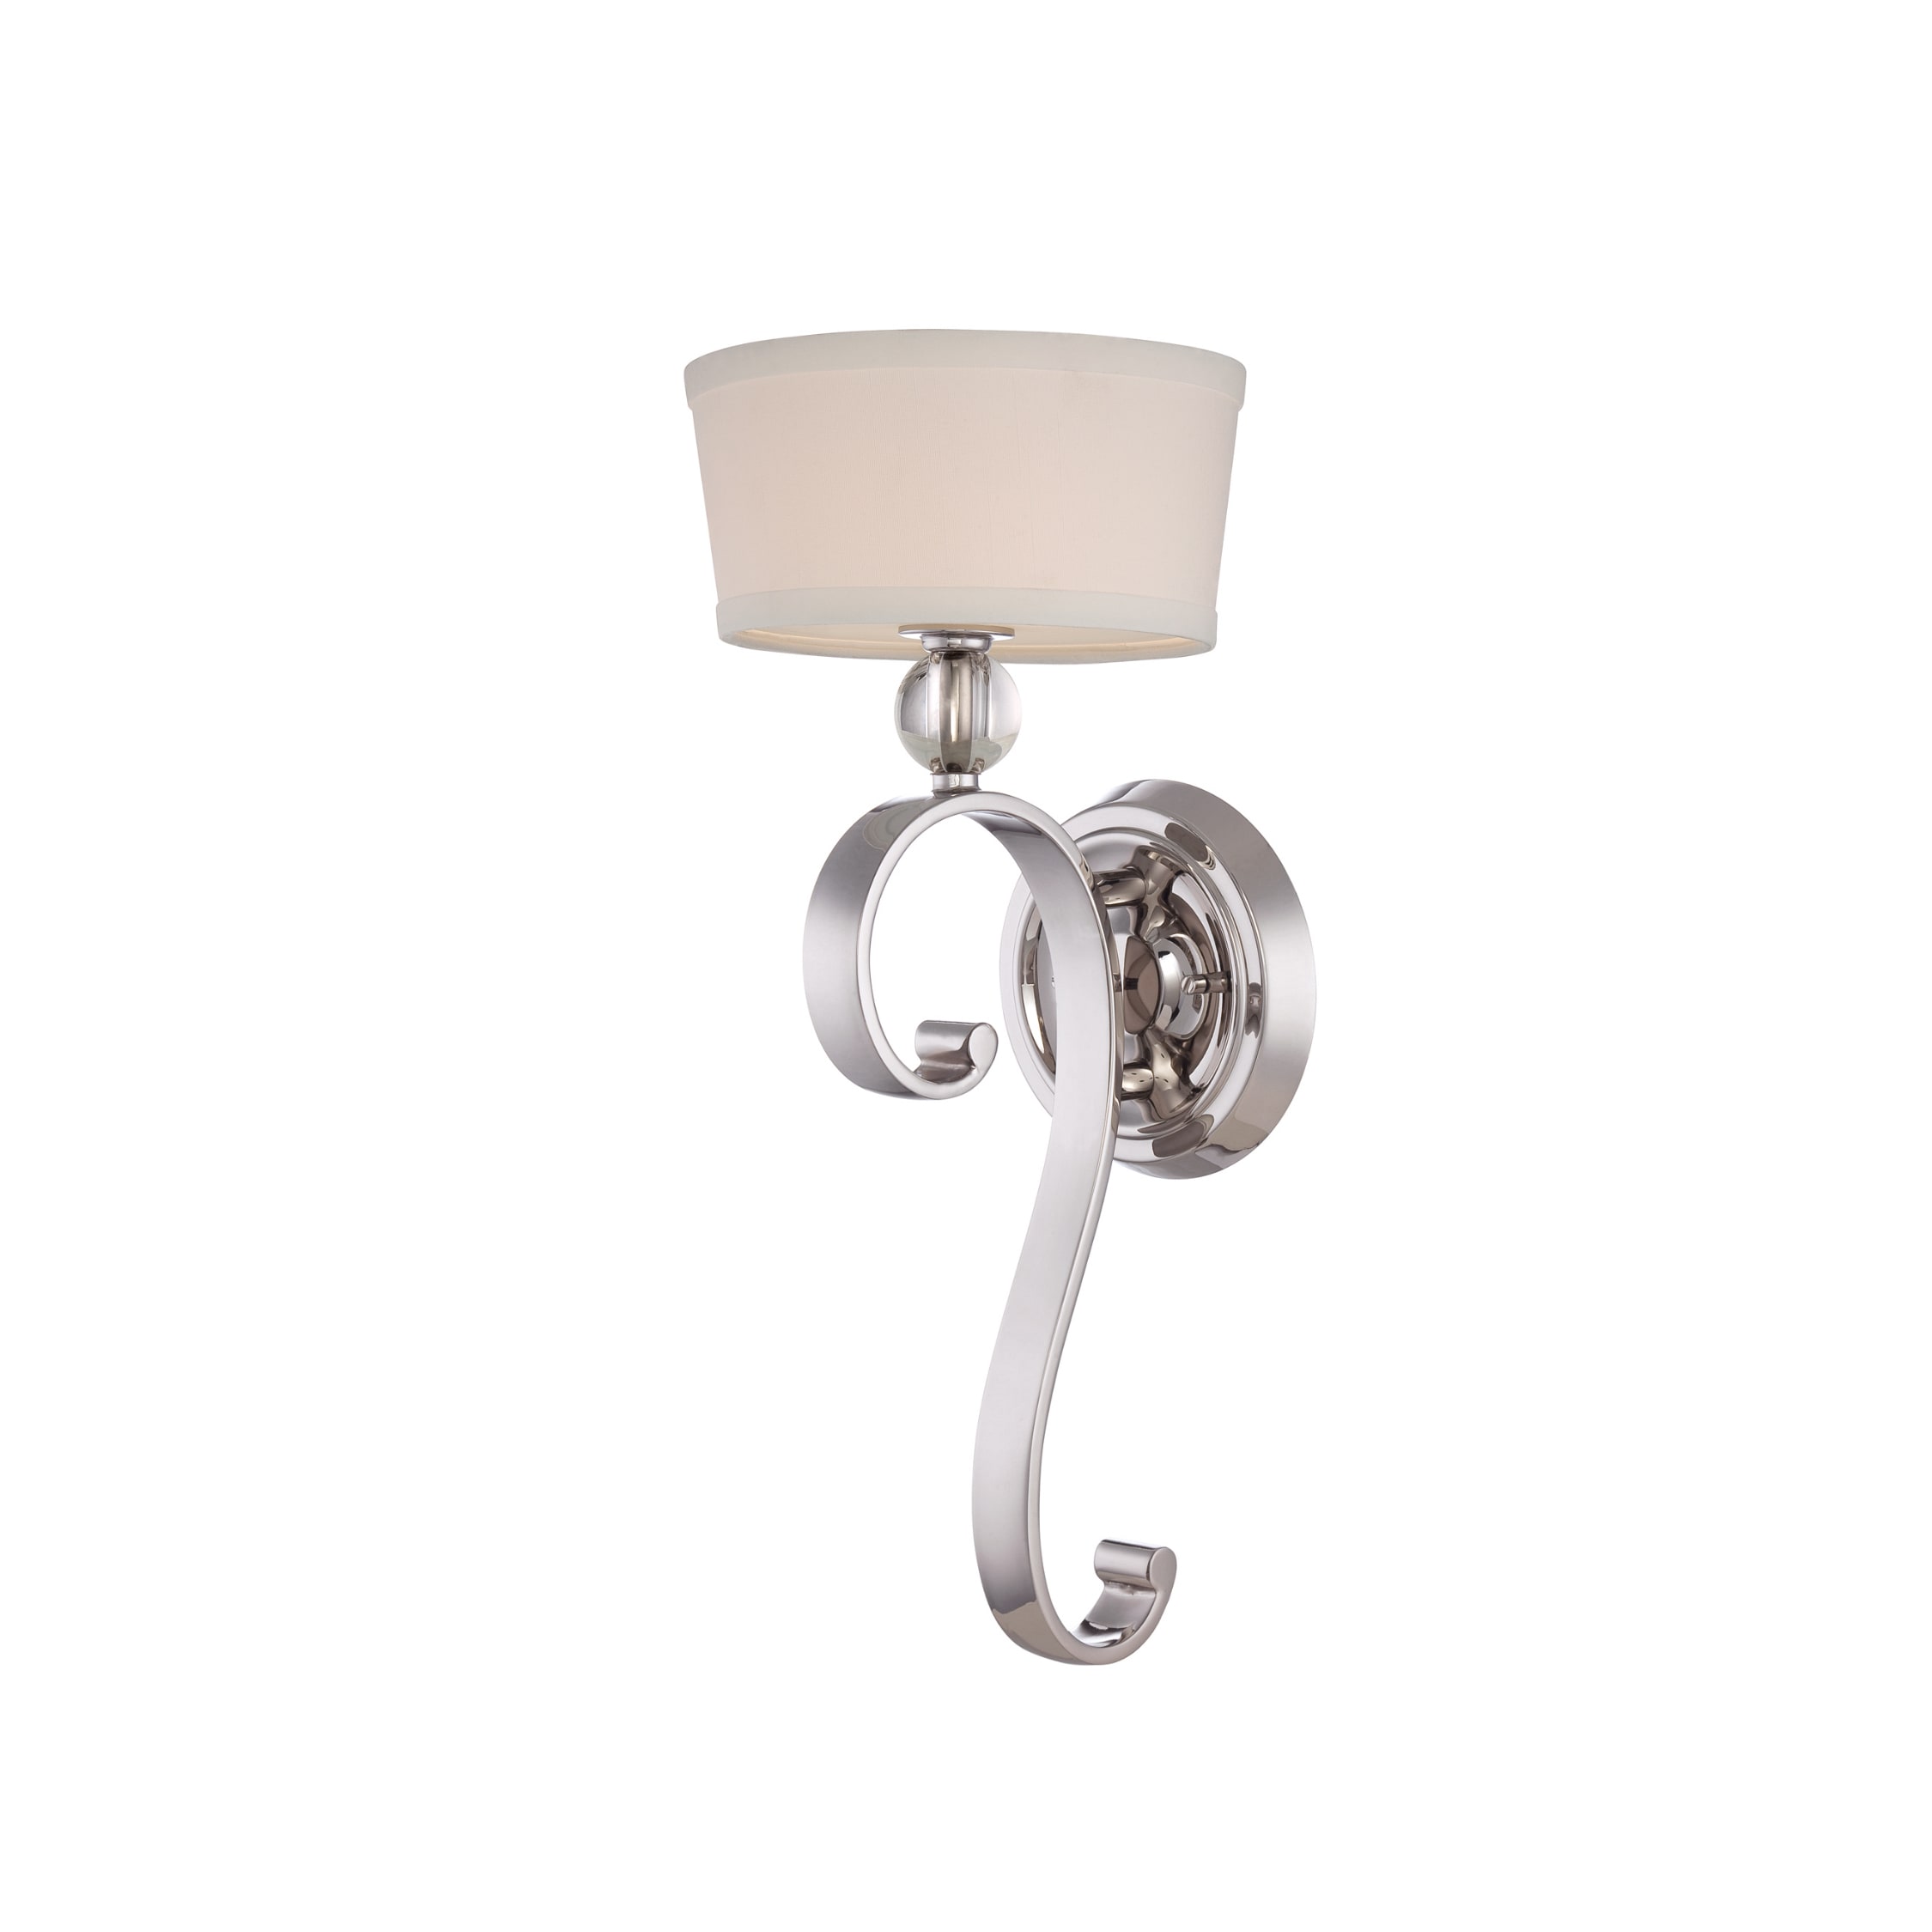 Quoizel Uptown Madison Manor 1 light Wall Sconce